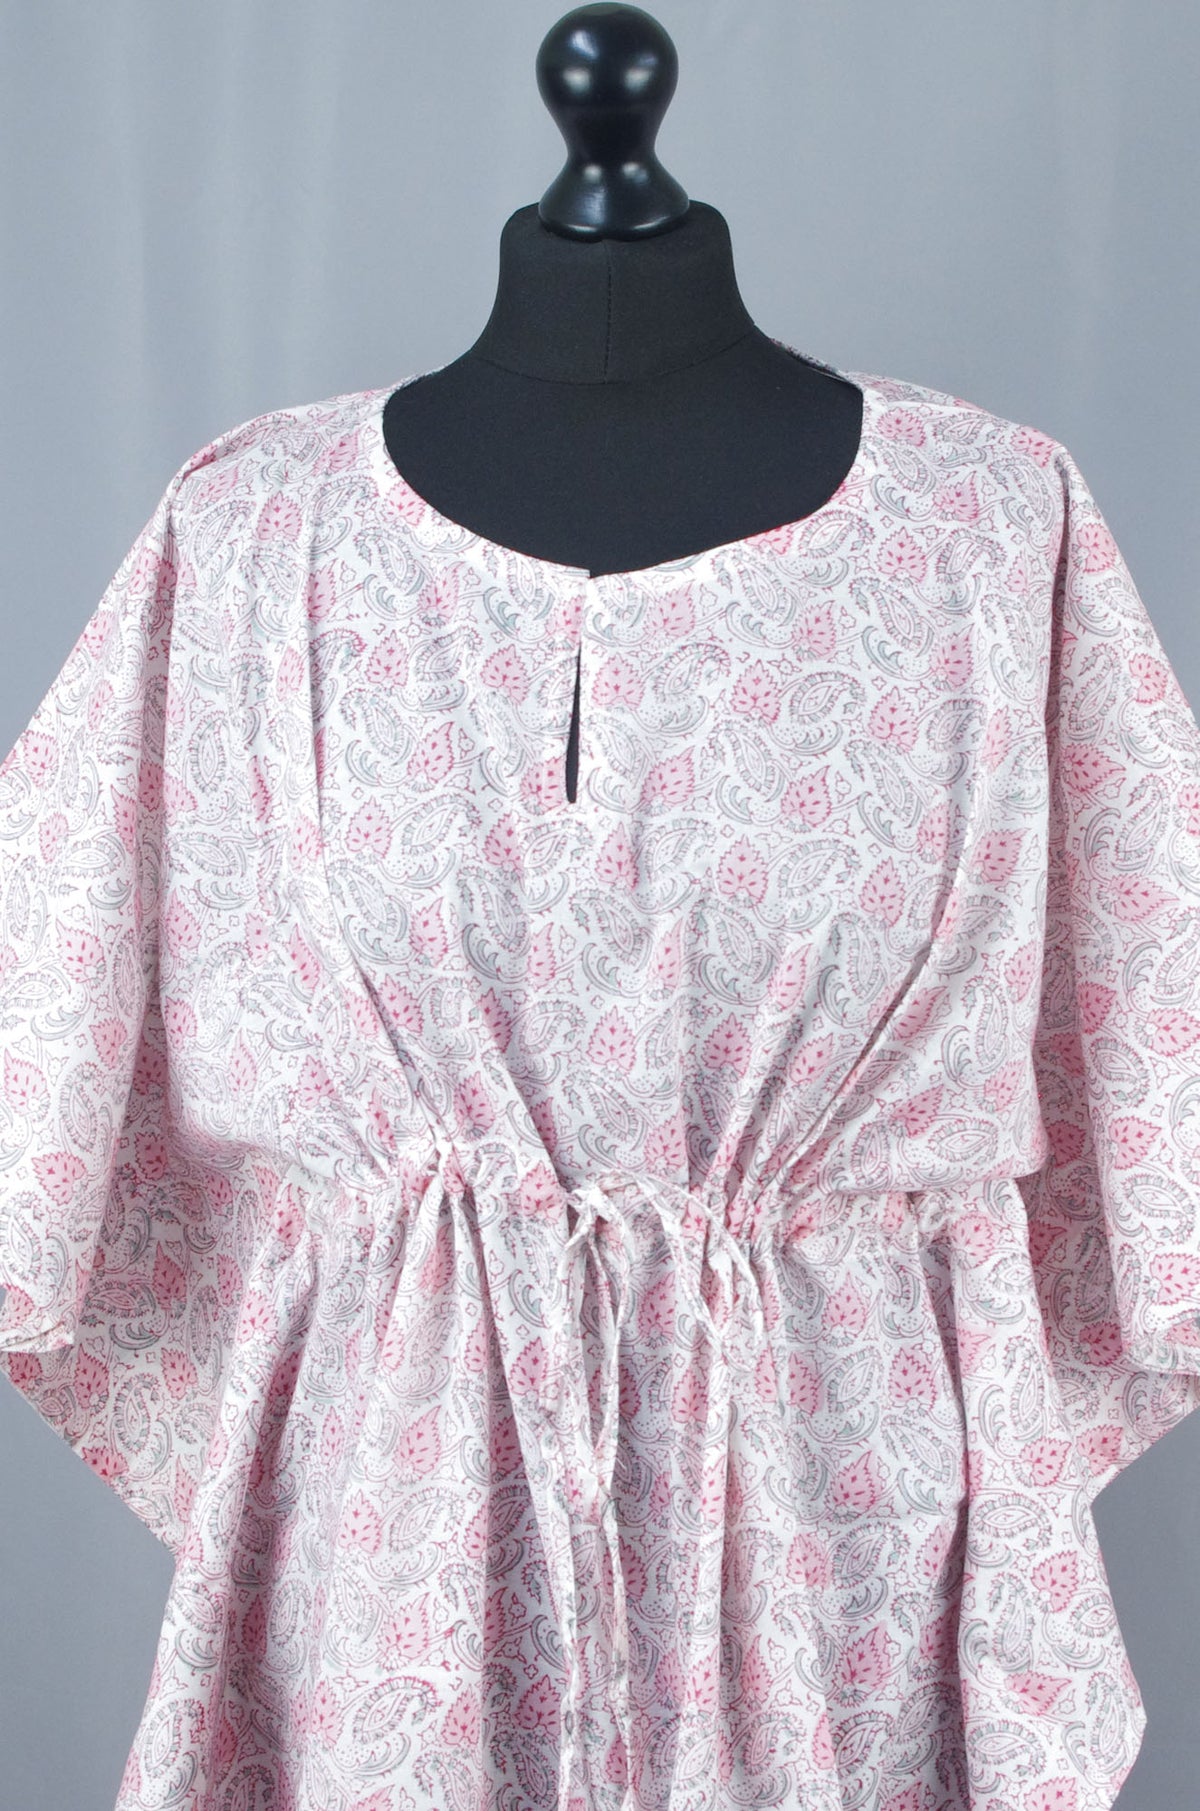 Block Printed Cotton Coverup / Kaftans - Pink Leaves